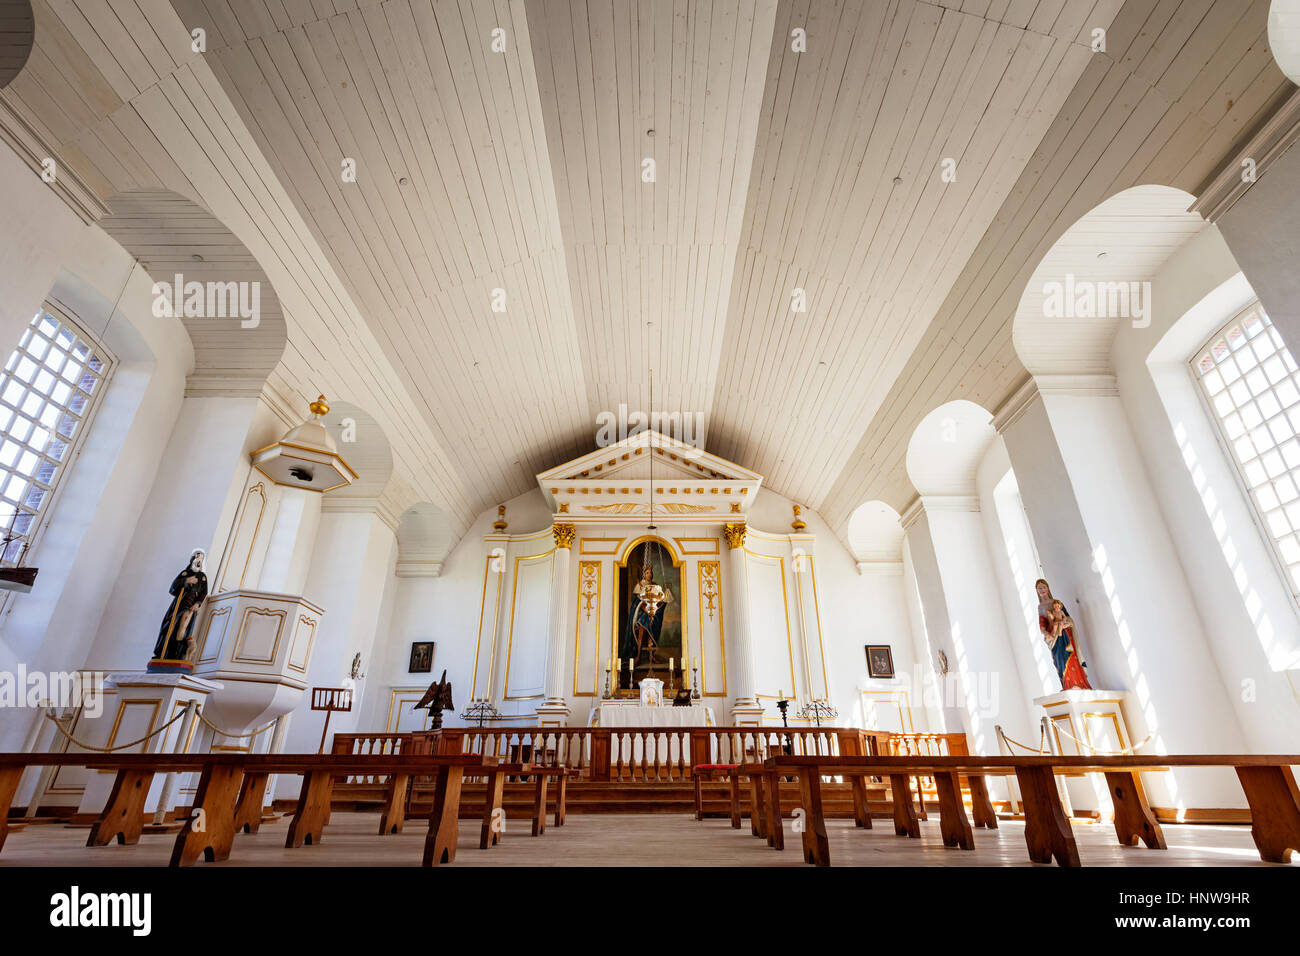 The church inside the Fortress of Louisbourg, Louisbourg National Historic Site, Nova Scotia, Canada Stock Photo